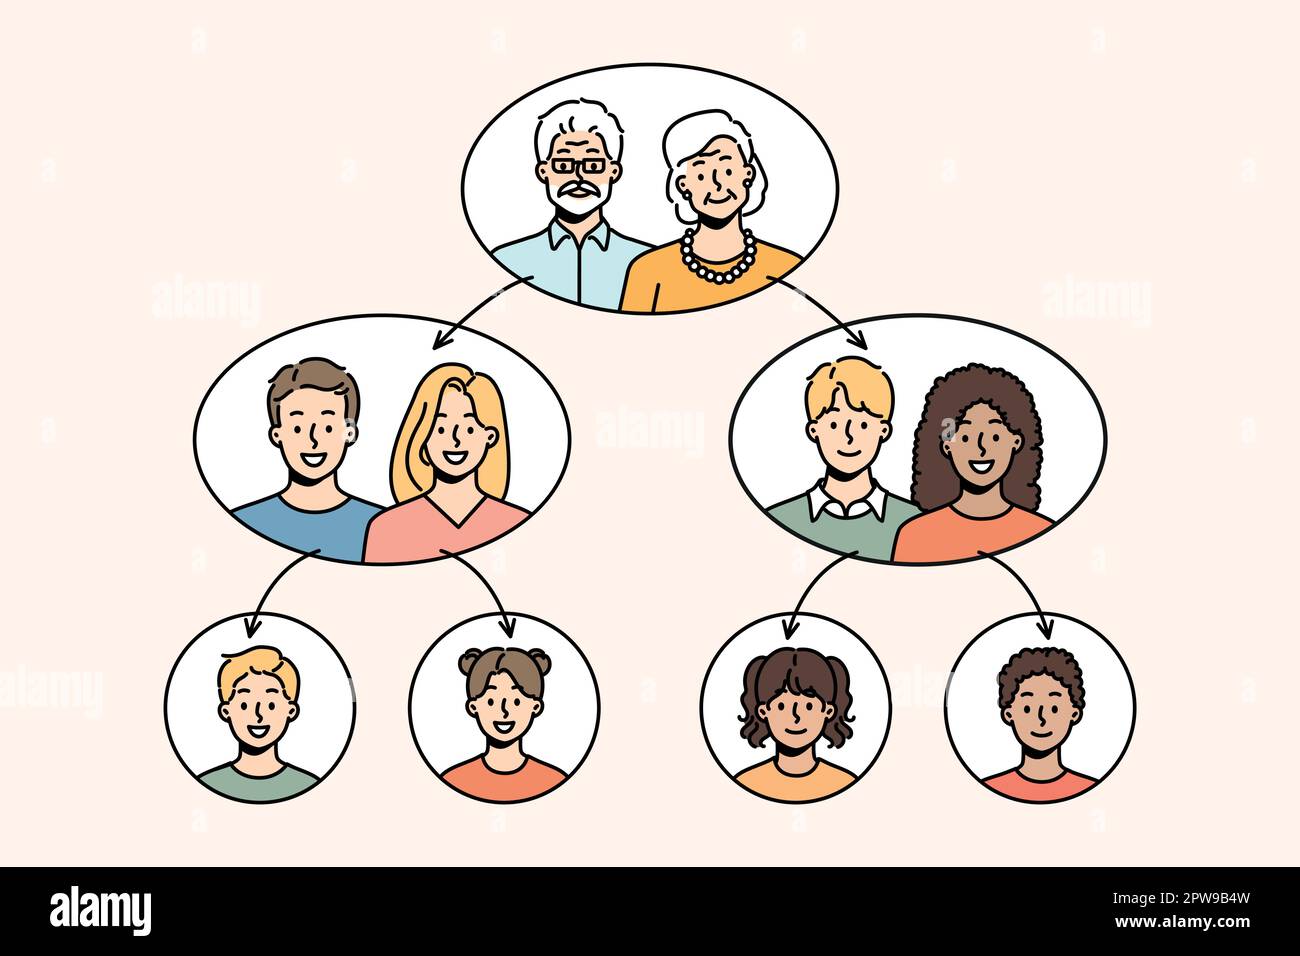 Family tree with younger and older generations Stock Vector